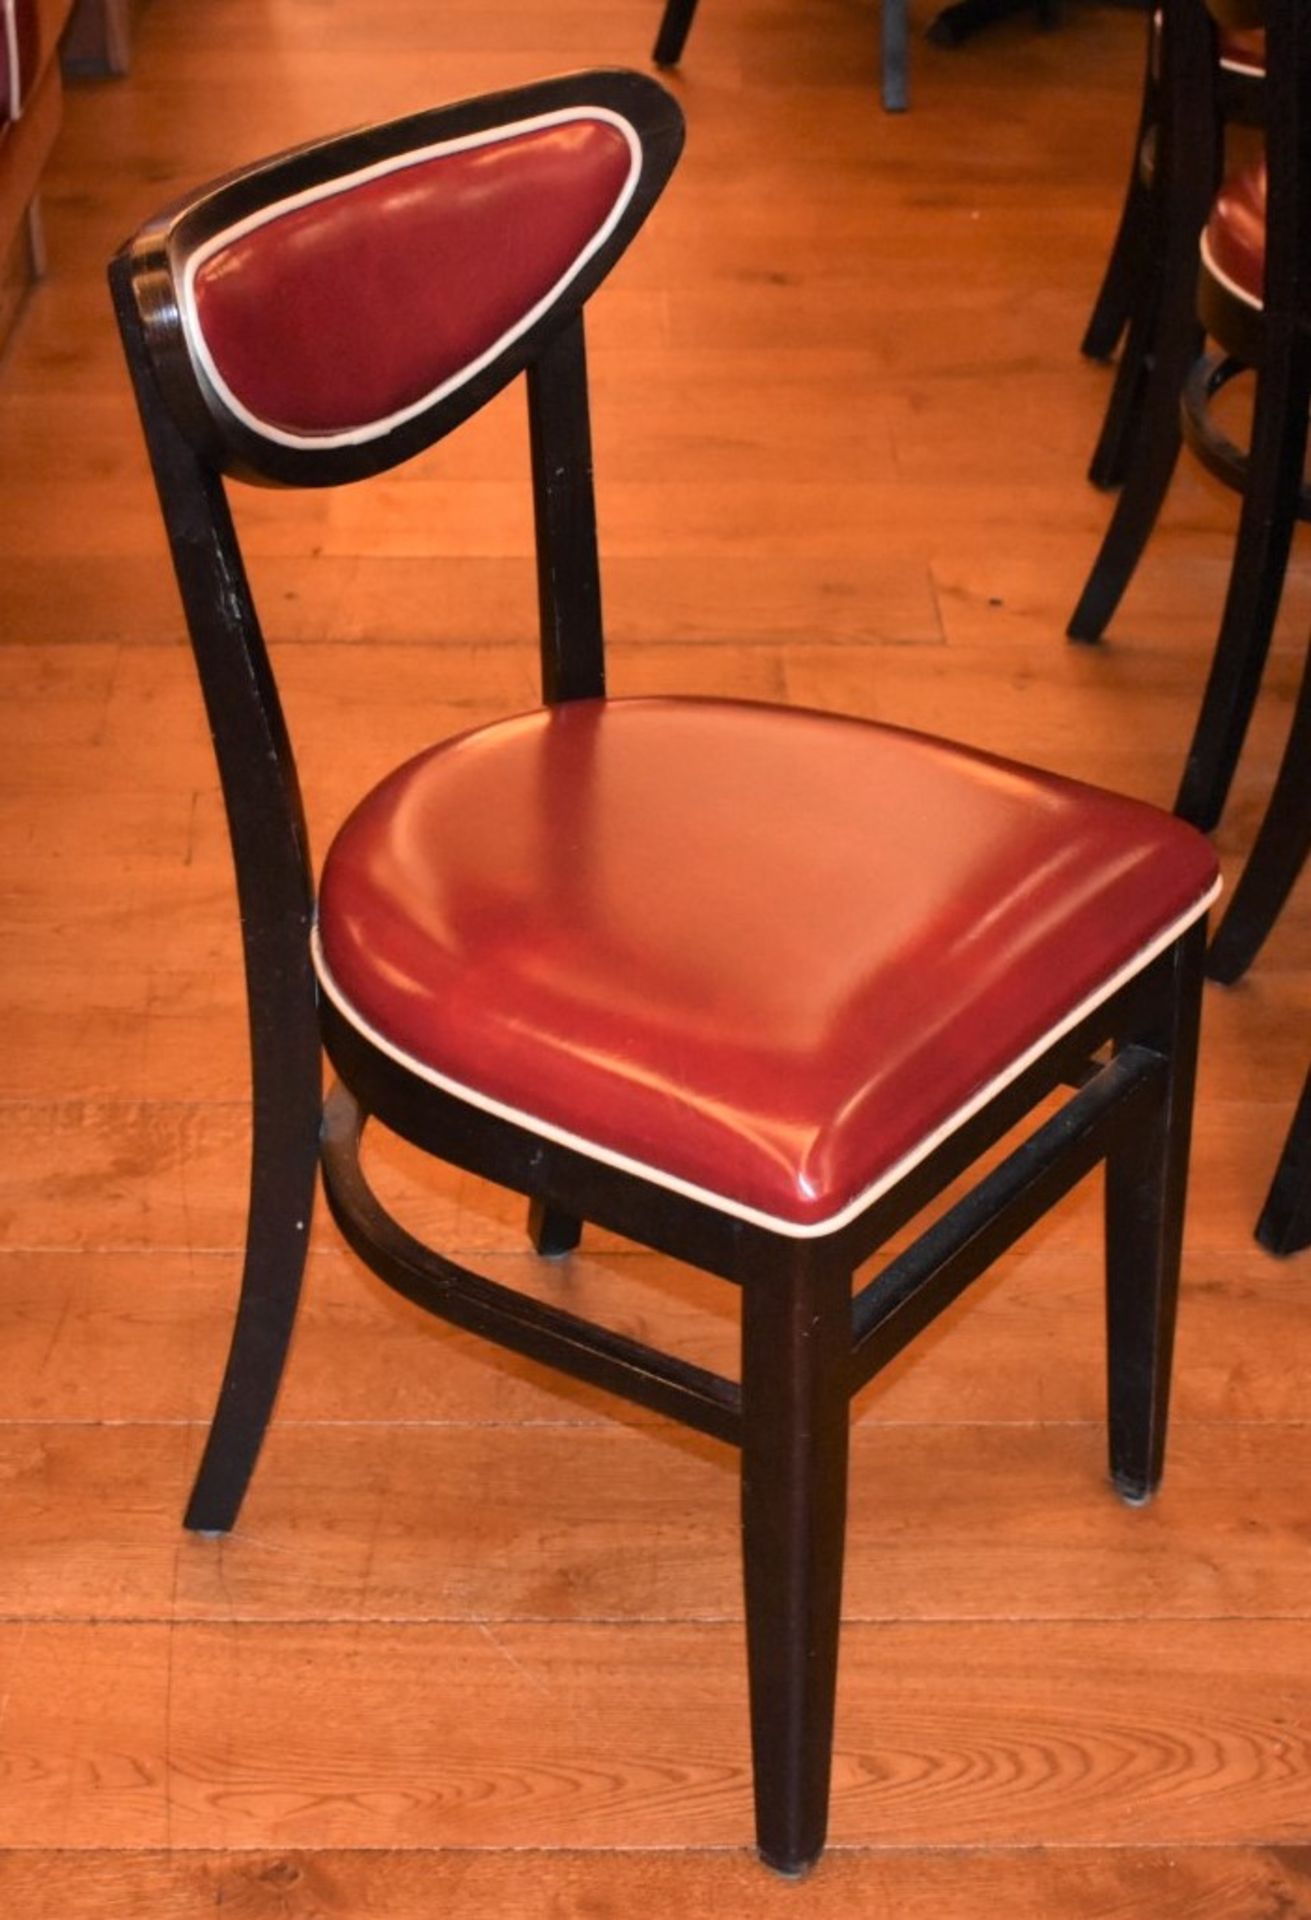 4 x American Diner Restaurant Chairs - Features Red Faux Leather Upholstery and White Piping - - Image 2 of 4